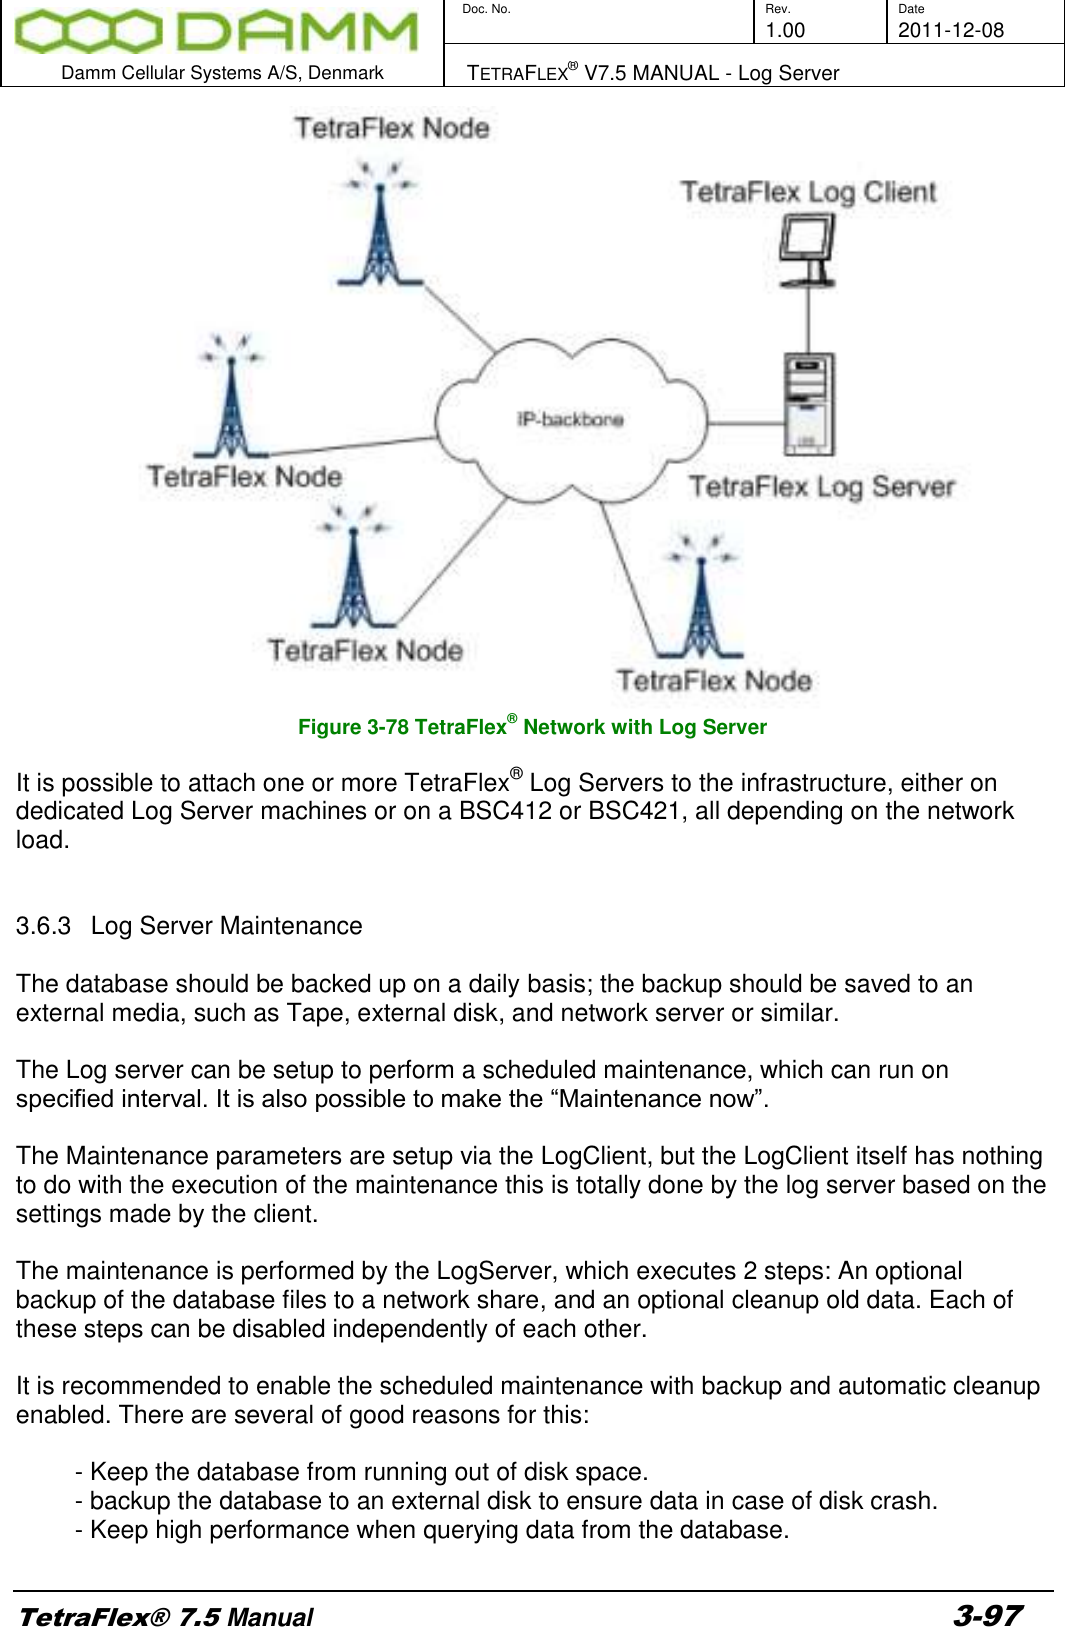        Doc. No. Rev. Date     1.00 2011-12-08  Damm Cellular Systems A/S, Denmark   TETRAFLEX® V7.5 MANUAL - Log Server  TetraFlex® 7.5 Manual 3-97  Figure 3-78 TetraFlex® Network with Log Server  It is possible to attach one or more TetraFlex® Log Servers to the infrastructure, either on dedicated Log Server machines or on a BSC412 or BSC421, all depending on the network load.   3.6.3  Log Server Maintenance   The database should be backed up on a daily basis; the backup should be saved to an external media, such as Tape, external disk, and network server or similar.  The Log server can be setup to perform a scheduled maintenance, which can run on specified interval. It is also possible to make the “Maintenance now”.   The Maintenance parameters are setup via the LogClient, but the LogClient itself has nothing to do with the execution of the maintenance this is totally done by the log server based on the settings made by the client.  The maintenance is performed by the LogServer, which executes 2 steps: An optional backup of the database files to a network share, and an optional cleanup old data. Each of these steps can be disabled independently of each other.  It is recommended to enable the scheduled maintenance with backup and automatic cleanup enabled. There are several of good reasons for this:  - Keep the database from running out of disk space.  - backup the database to an external disk to ensure data in case of disk crash. - Keep high performance when querying data from the database.    